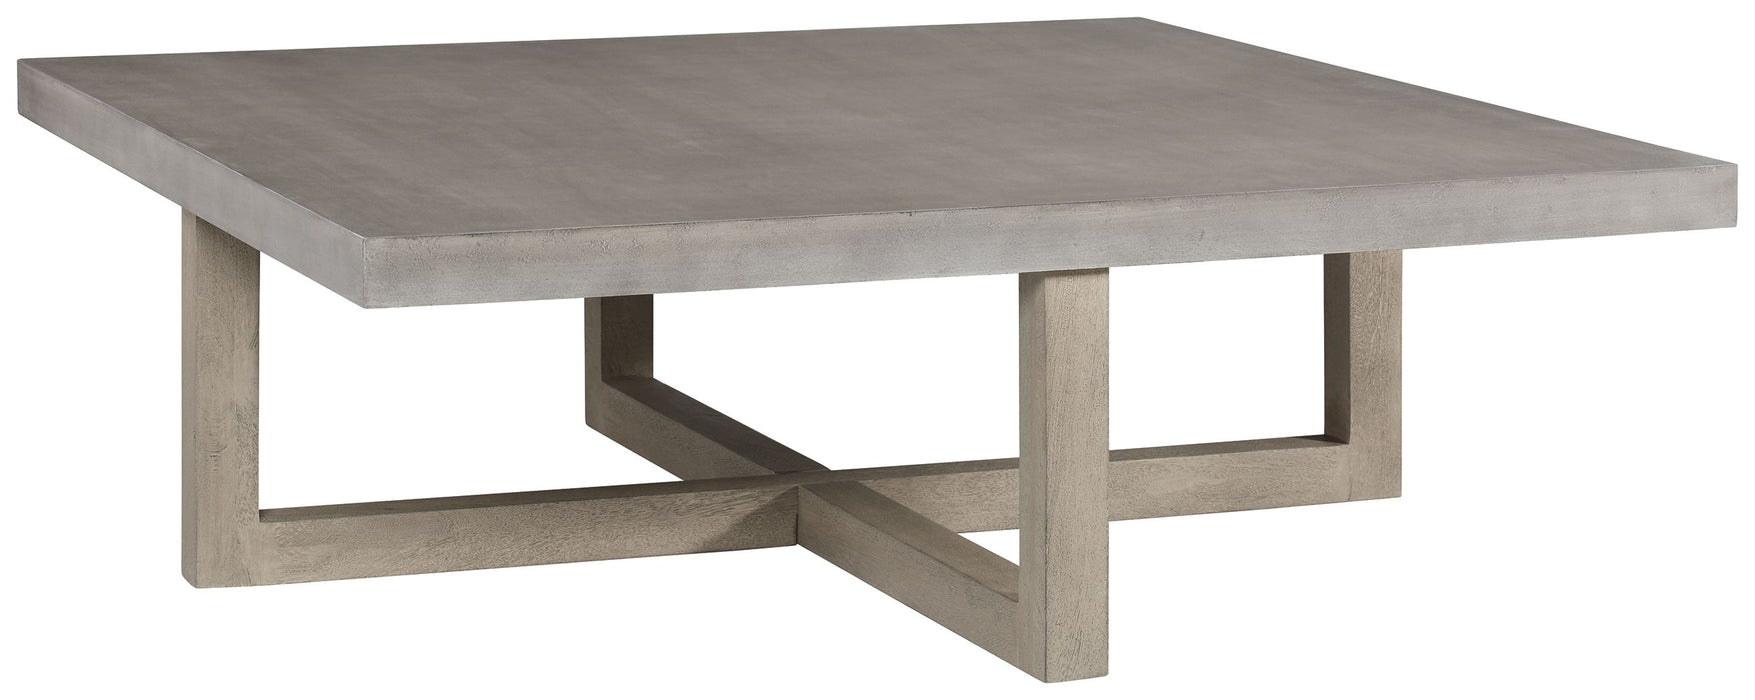 Lockthorne - Gray - Square Cocktail Table Cleveland Home Outlet (OH) - Furniture Store in Middleburg Heights Serving Cleveland, Strongsville, and Online